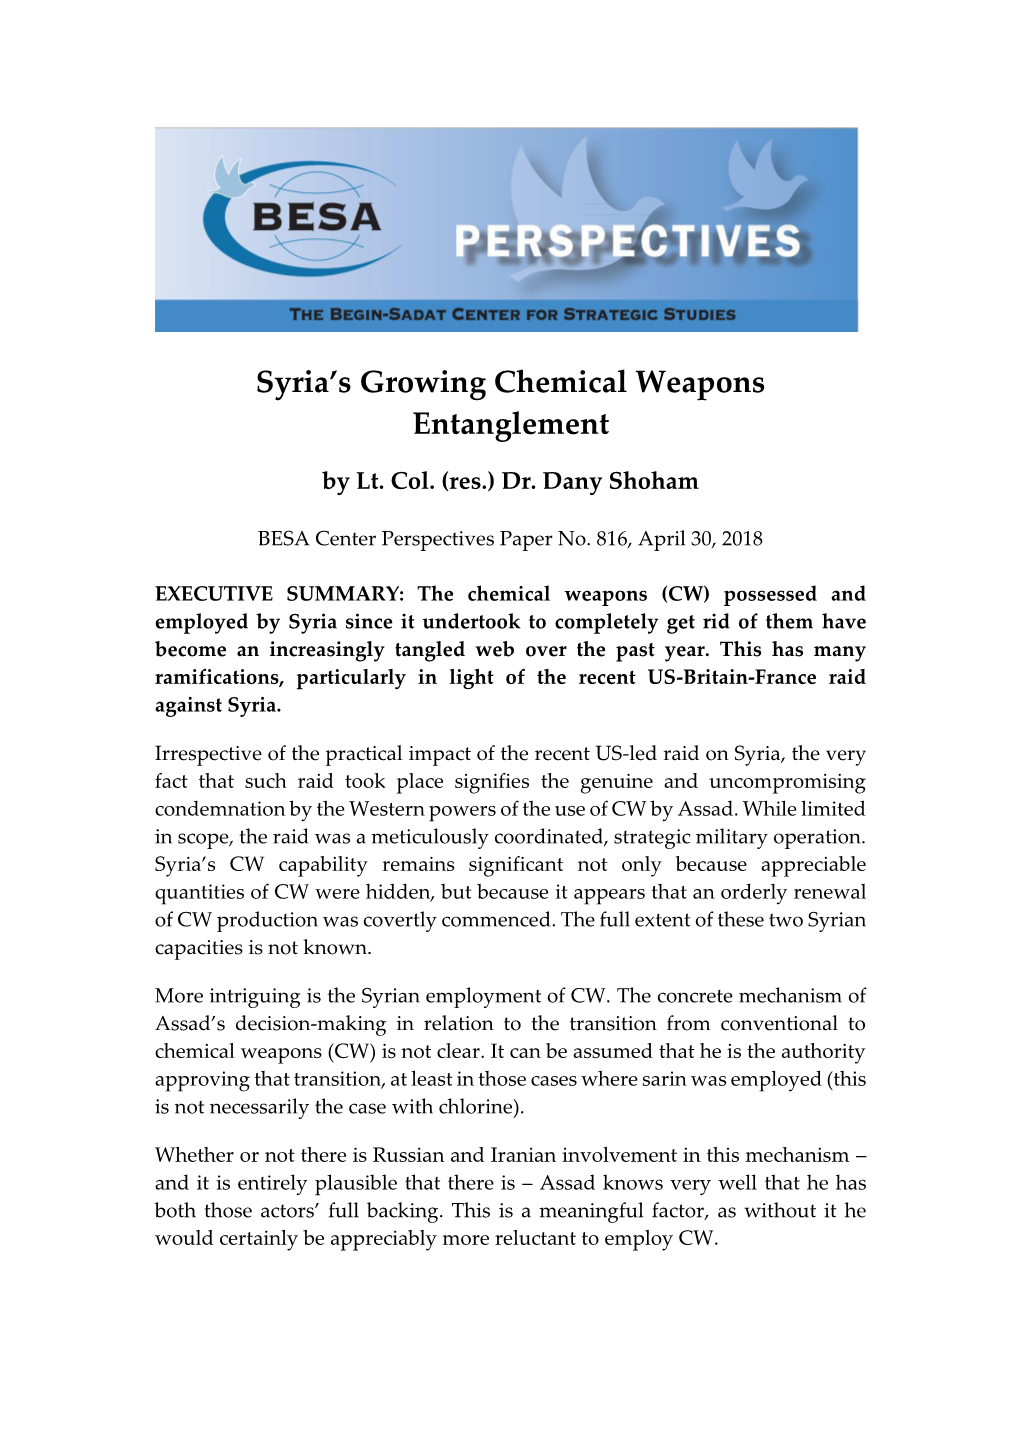 Syria's Growing Chemical Weapons Entanglement